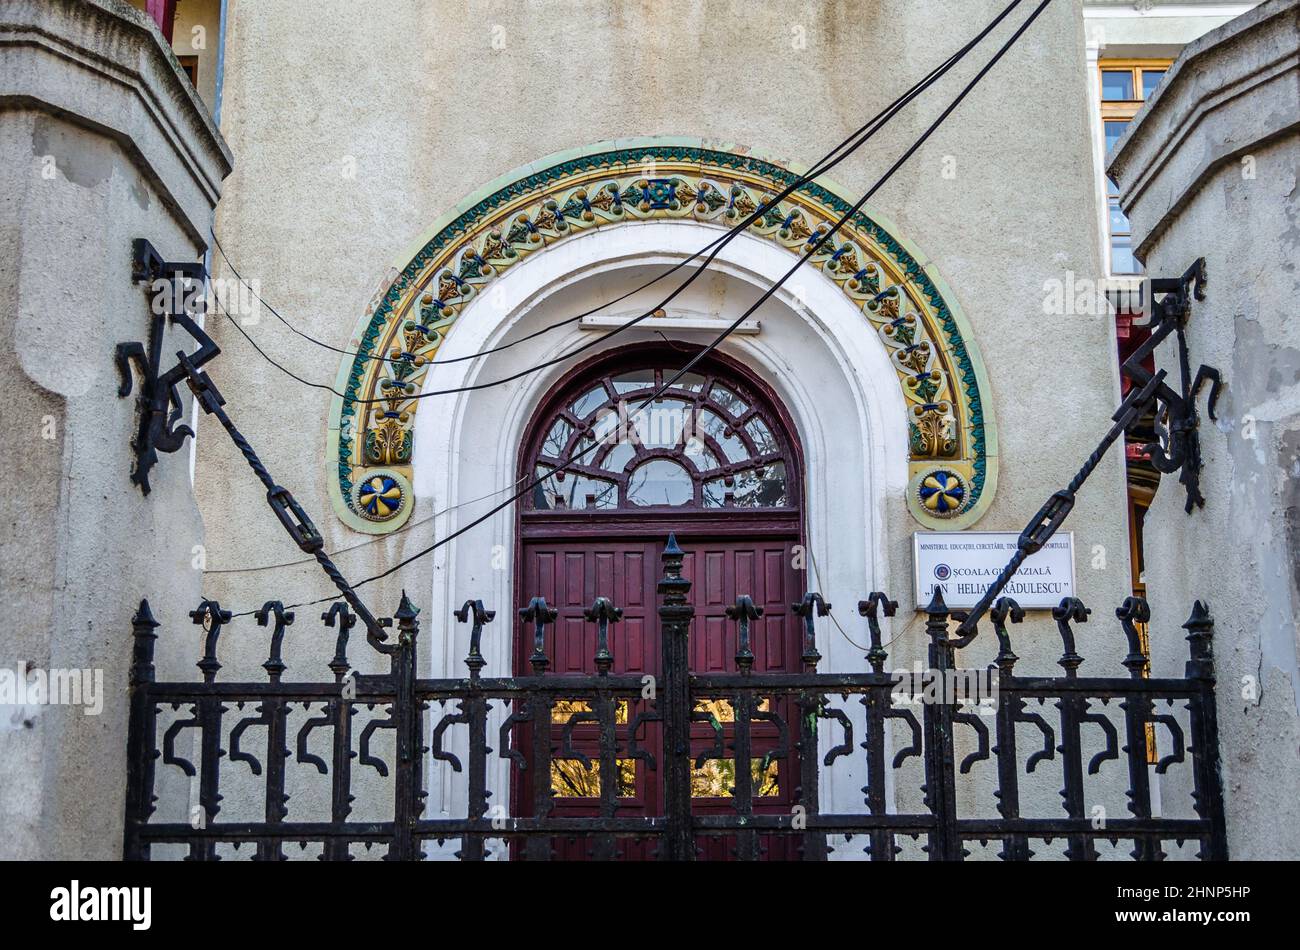 BUCHAREST, ROMANIA - NOVEMBER 10, 2013: Facade of 'Ion Heliade Radulescu' School, a well-preserved building, built in neo-Romanian style, a historical monument in Bucharest, Romania Stock Photo